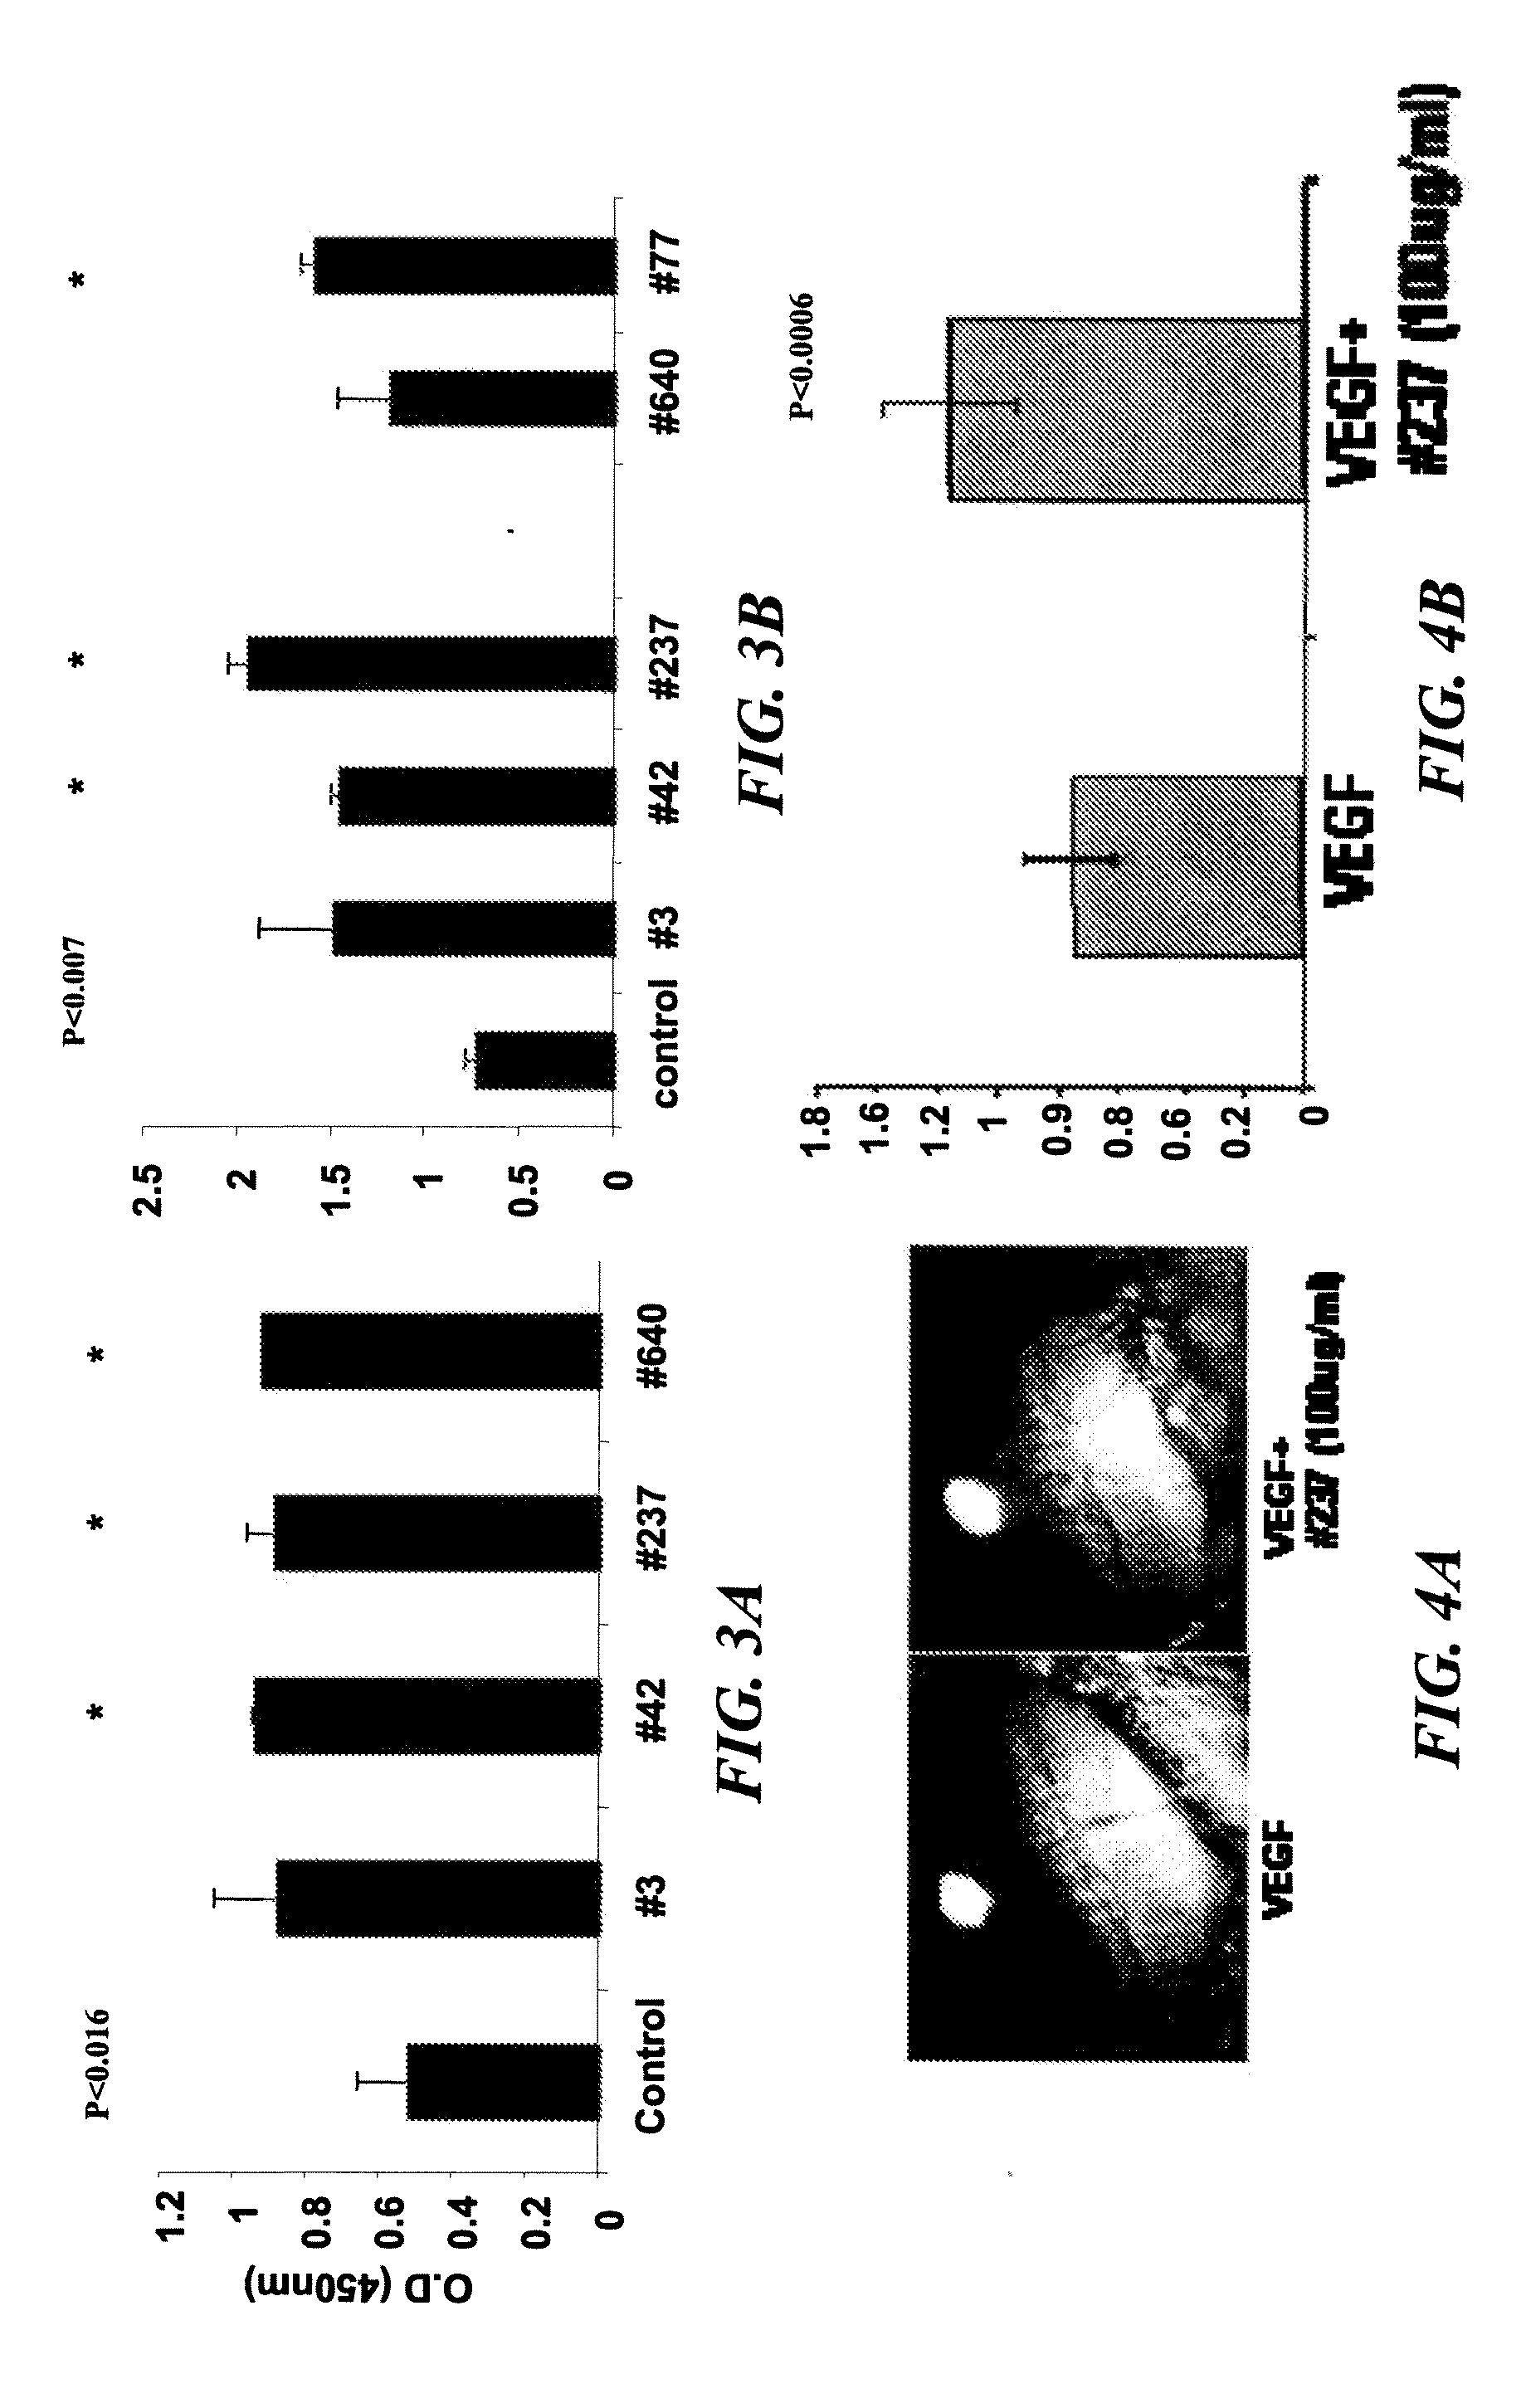 Pro-angiogenic fragments of prominin-1 and uses thereof